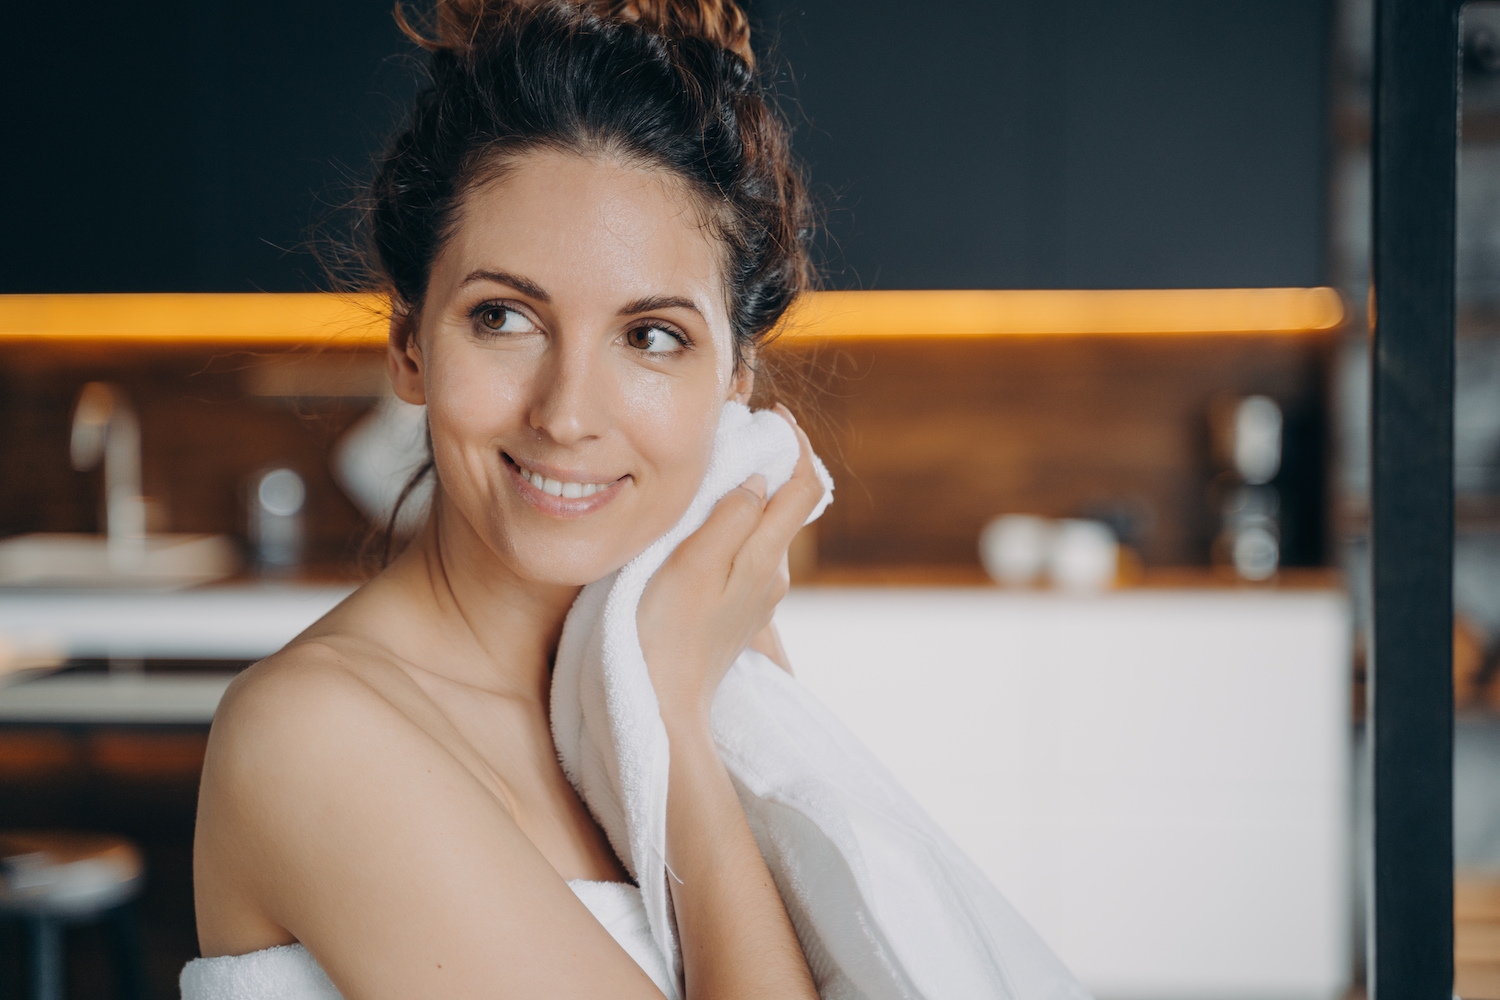 A smiling woman wearing a towel wipes her face off with another white towel while looking off to the side